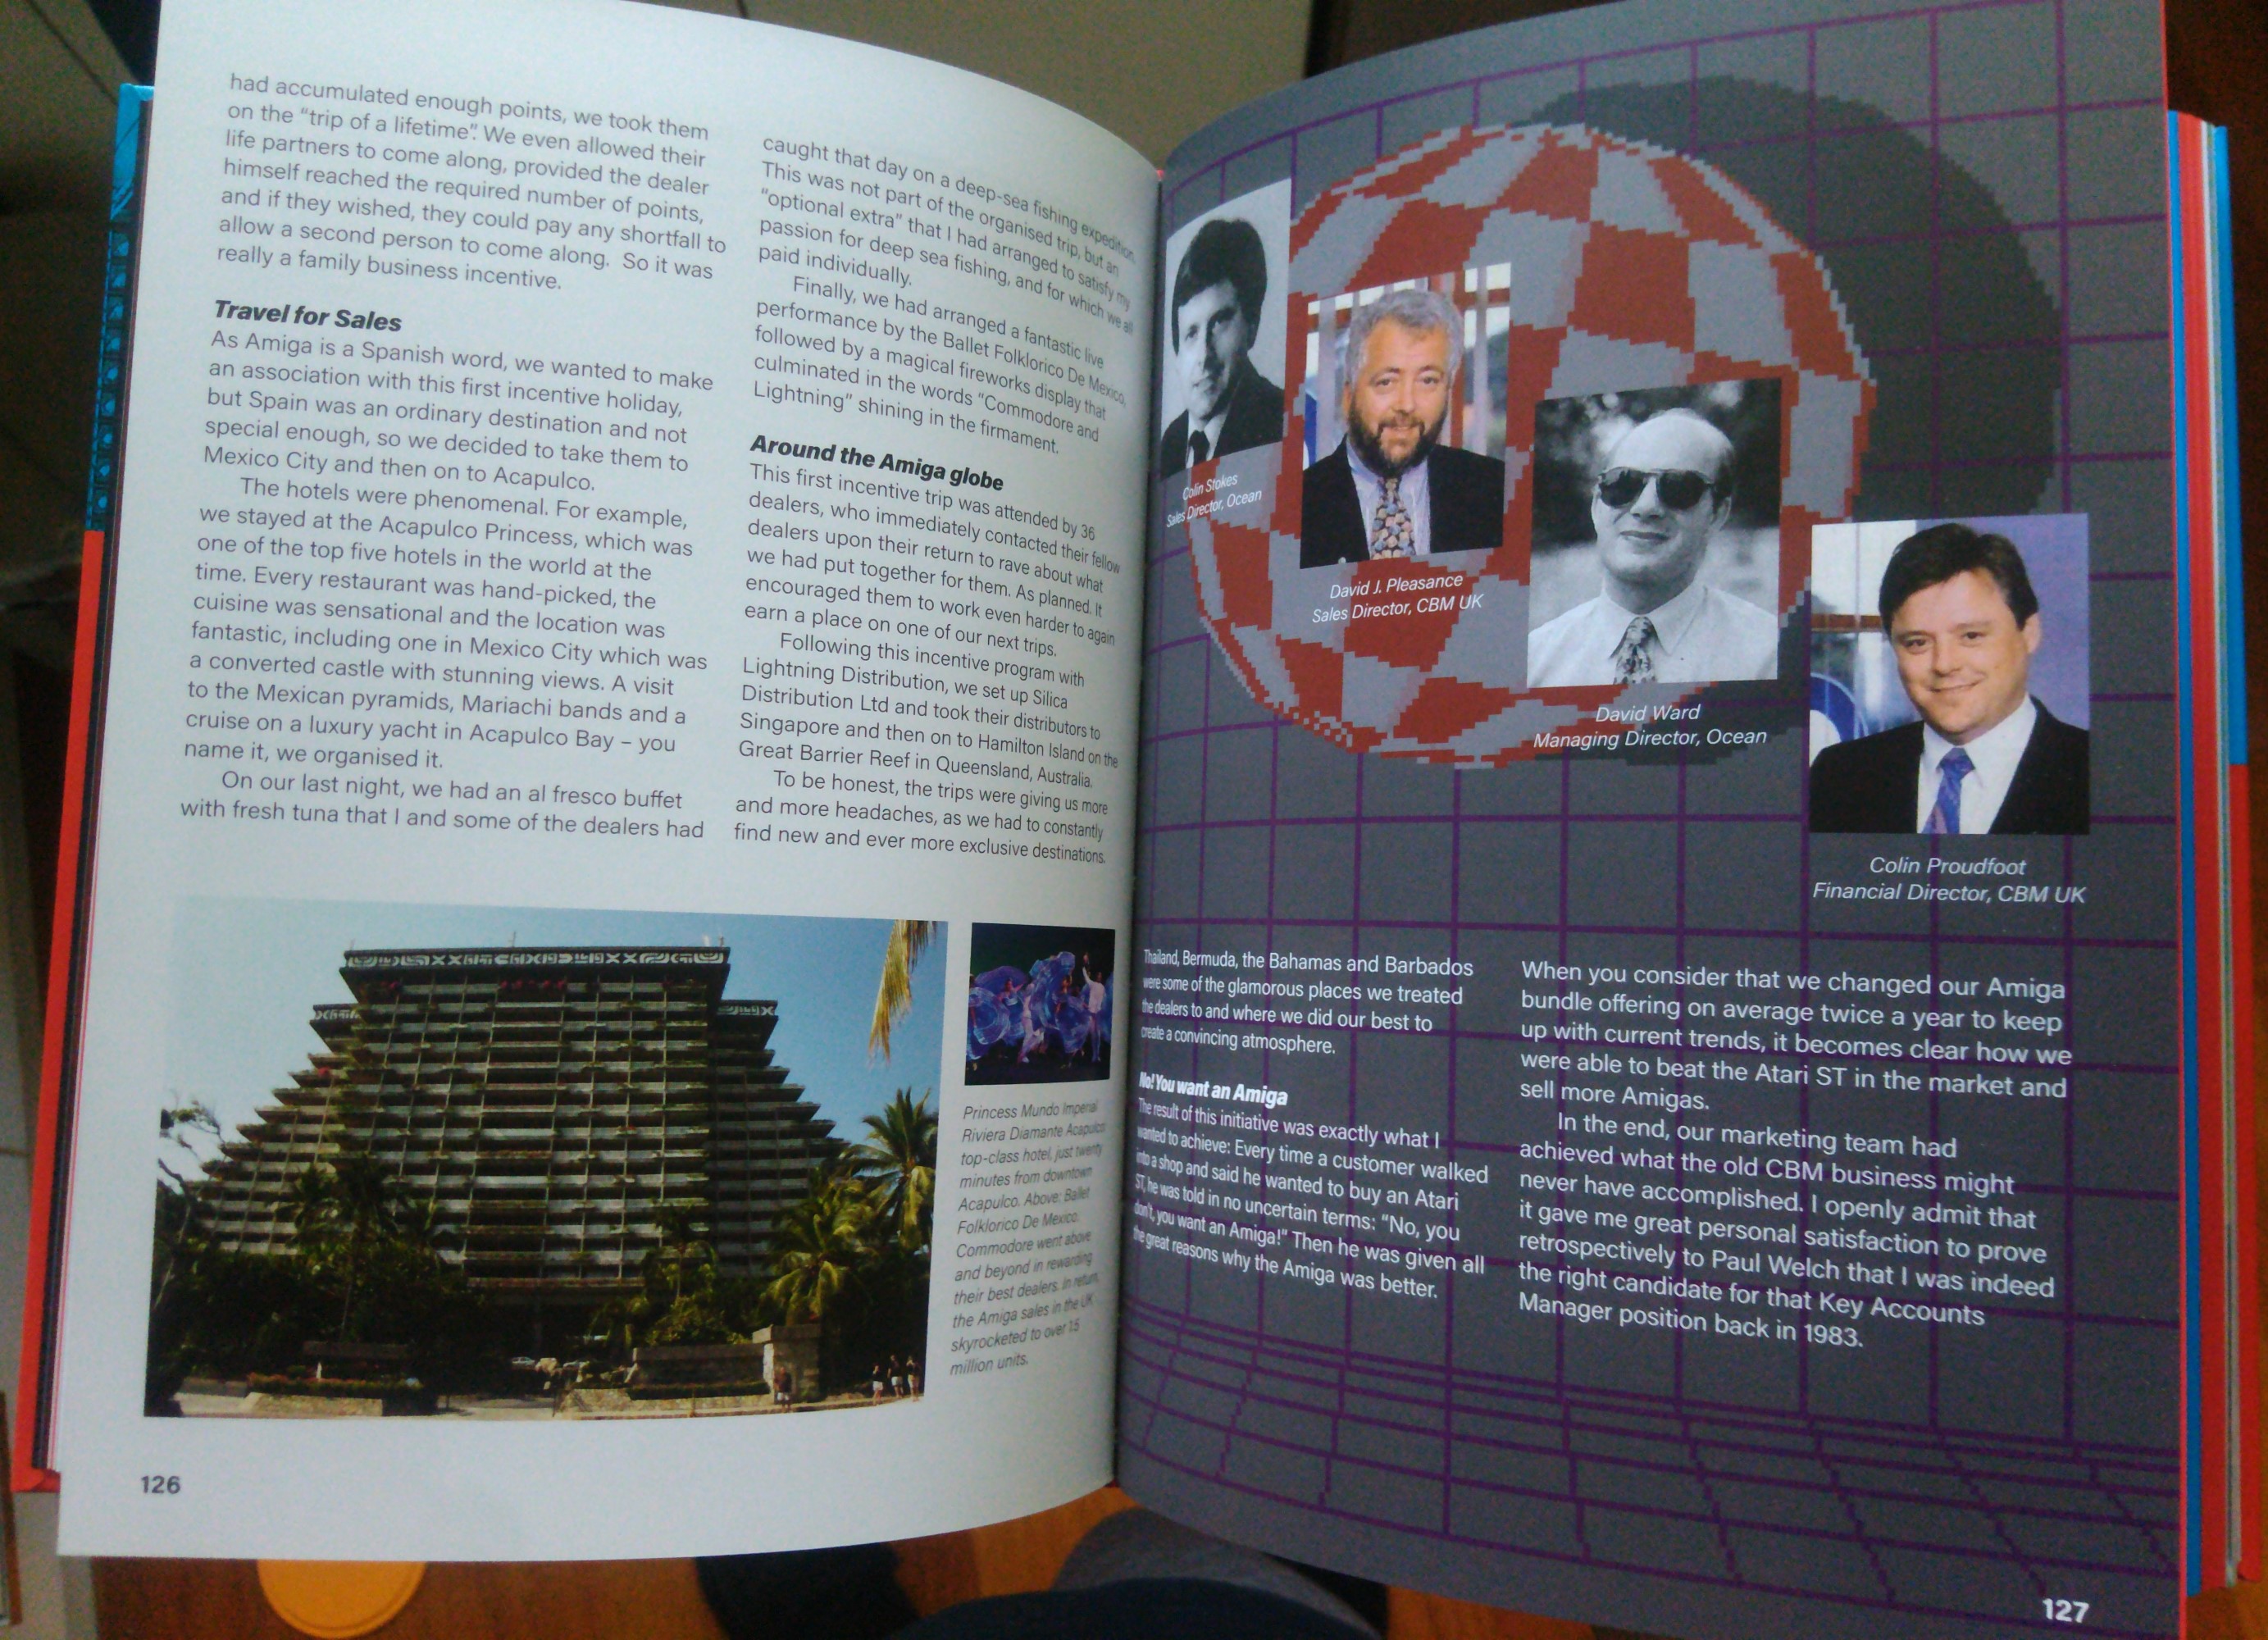 A random page spread from inside the book. This spread seems to be from a first-hand account on marketing the Amiga in its early days.